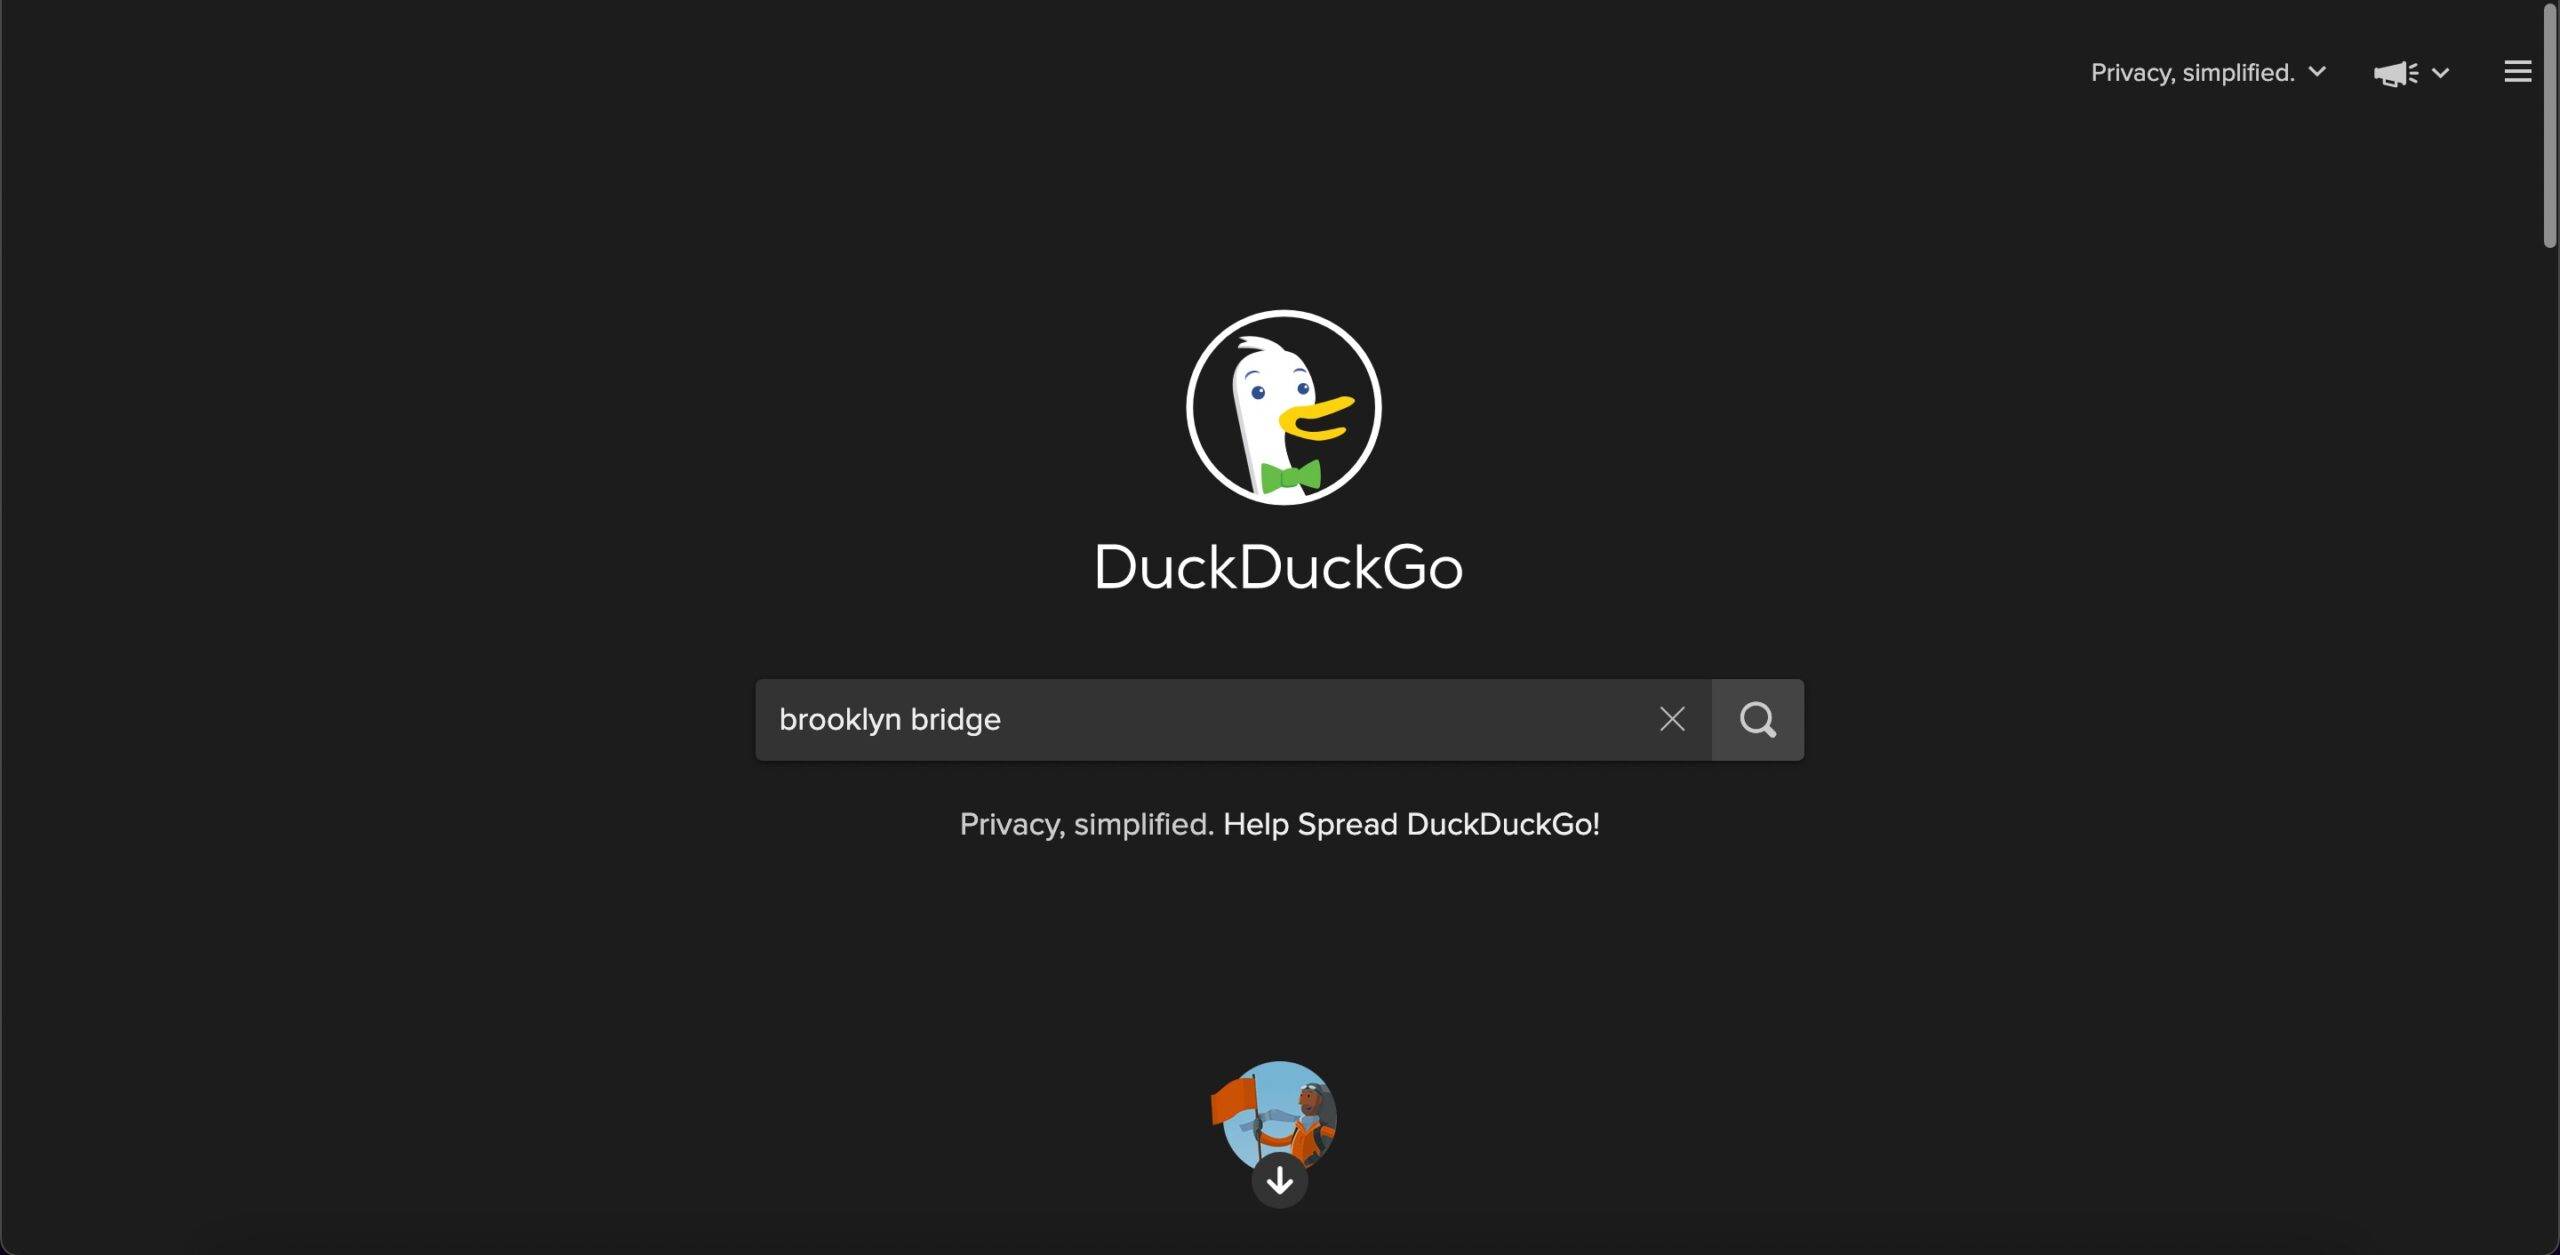 Search_for_any_location_on_duckduckgo-scaled-1